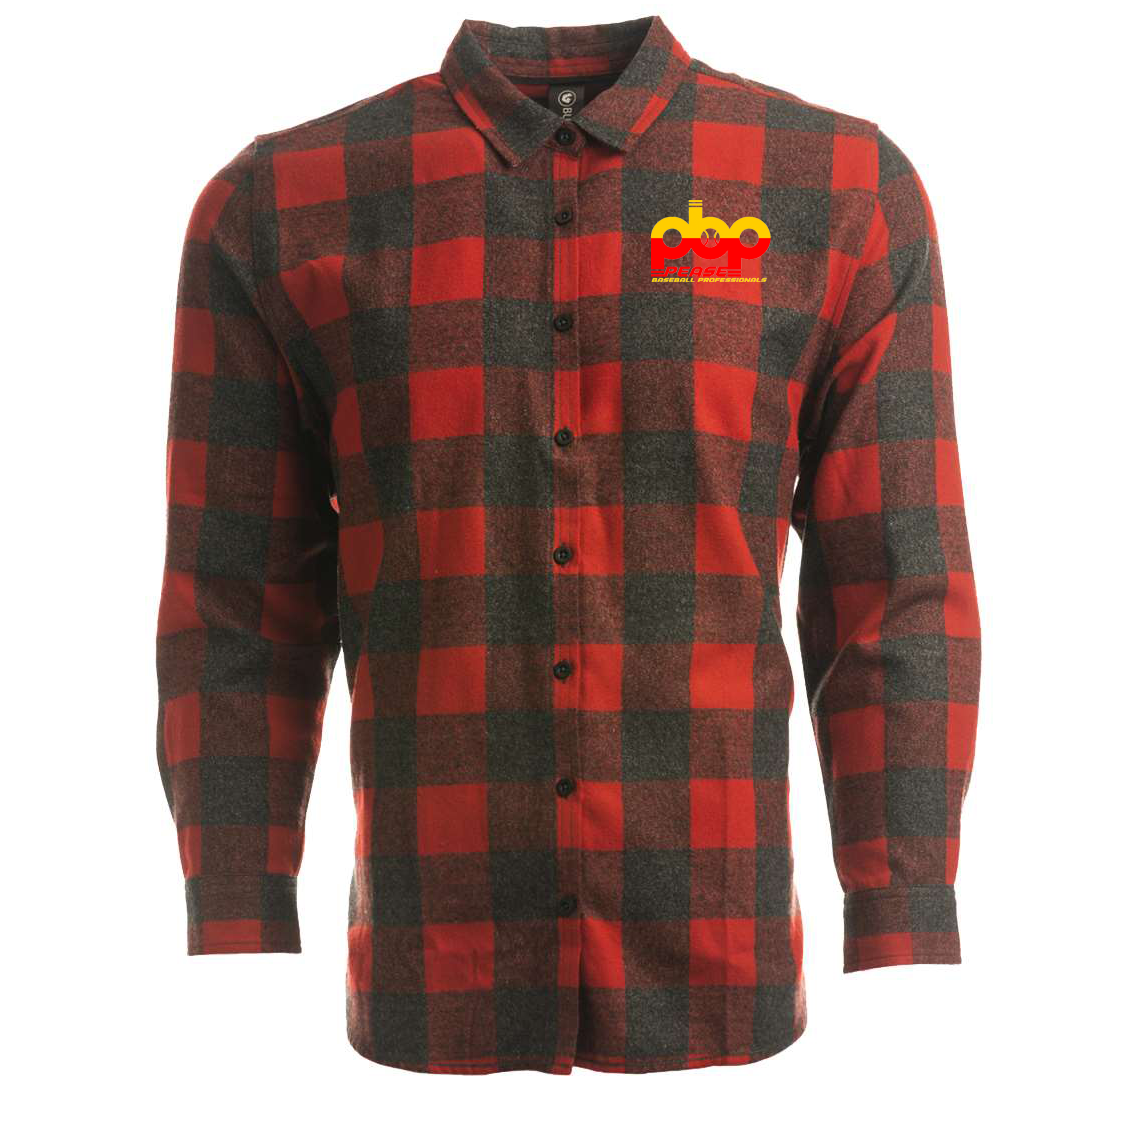 Pease Baseball Professionals Women's No Pocket Yarn-Dyed Long Sleeve Flannel Shirt